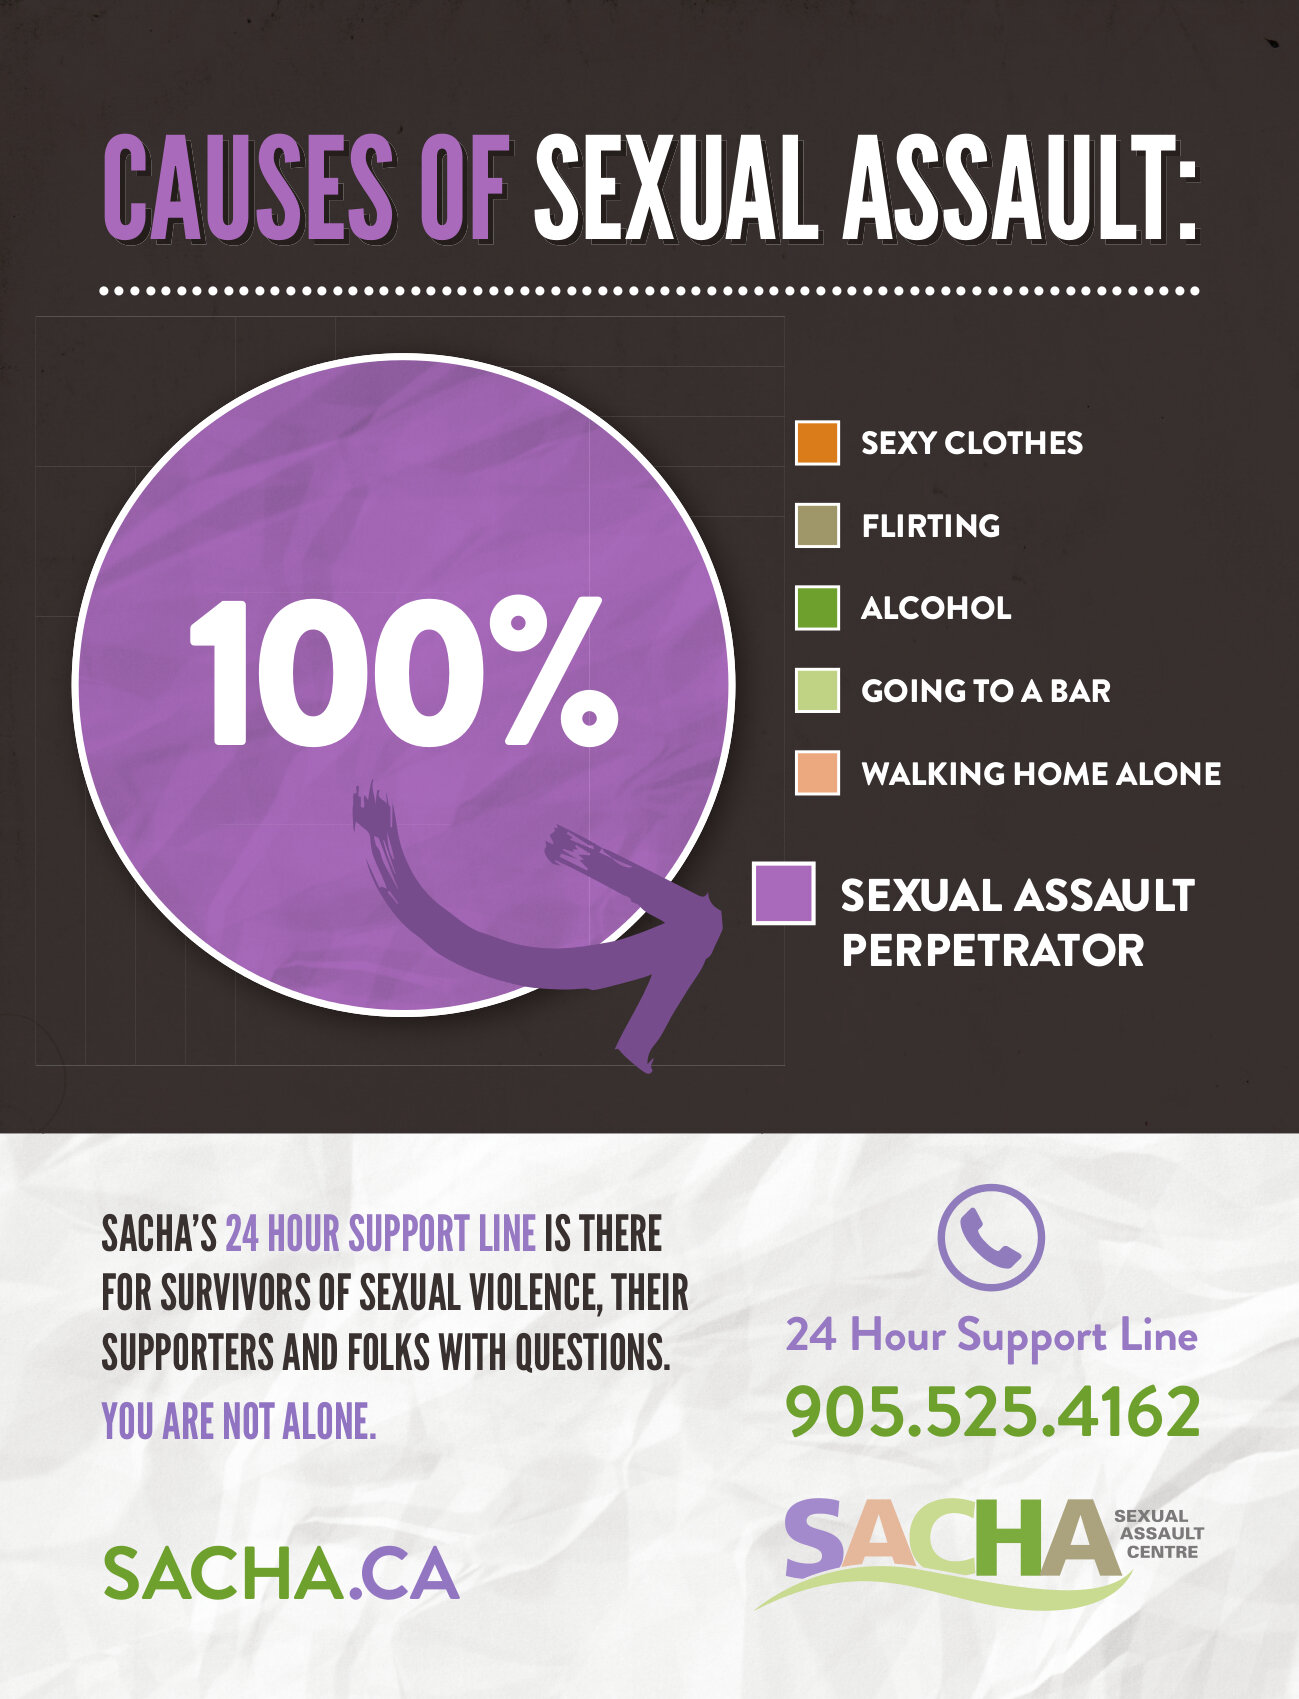 Causes of Sexual Assault.jpg